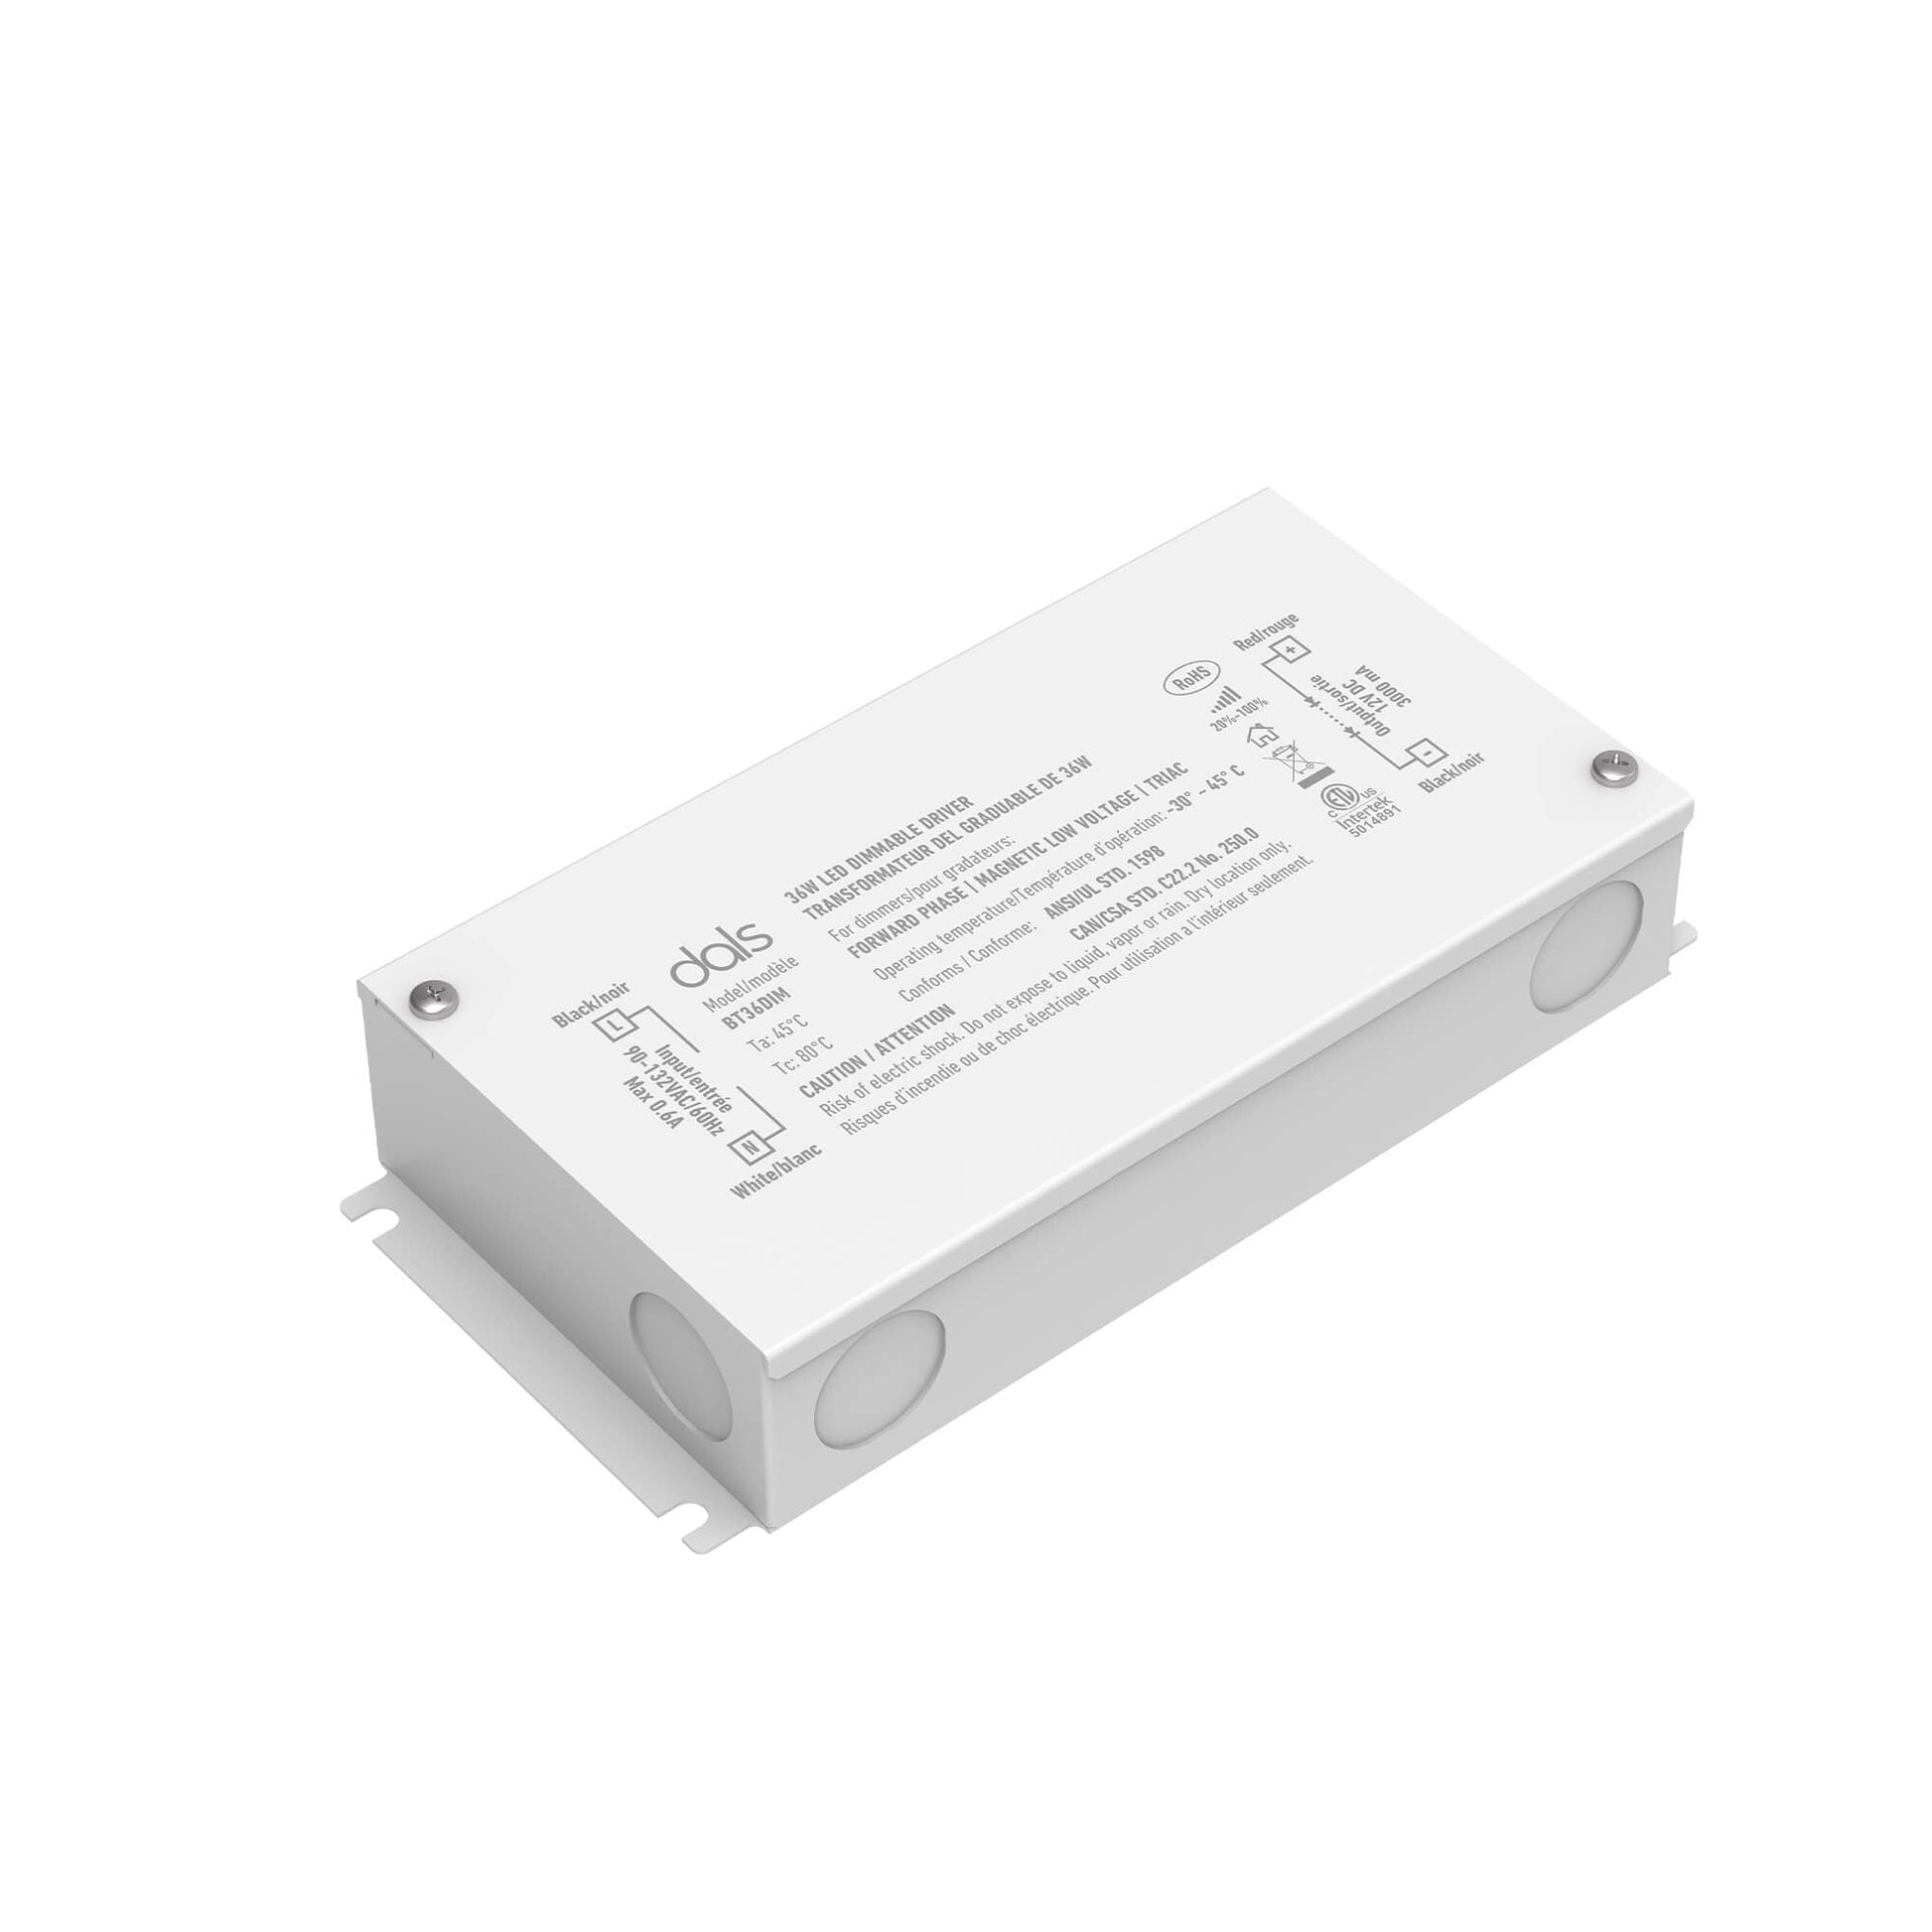 DALS-BT36DIM-ICDals Lighting BTXXDIM-IC 12VDC Dimmable LED Driver